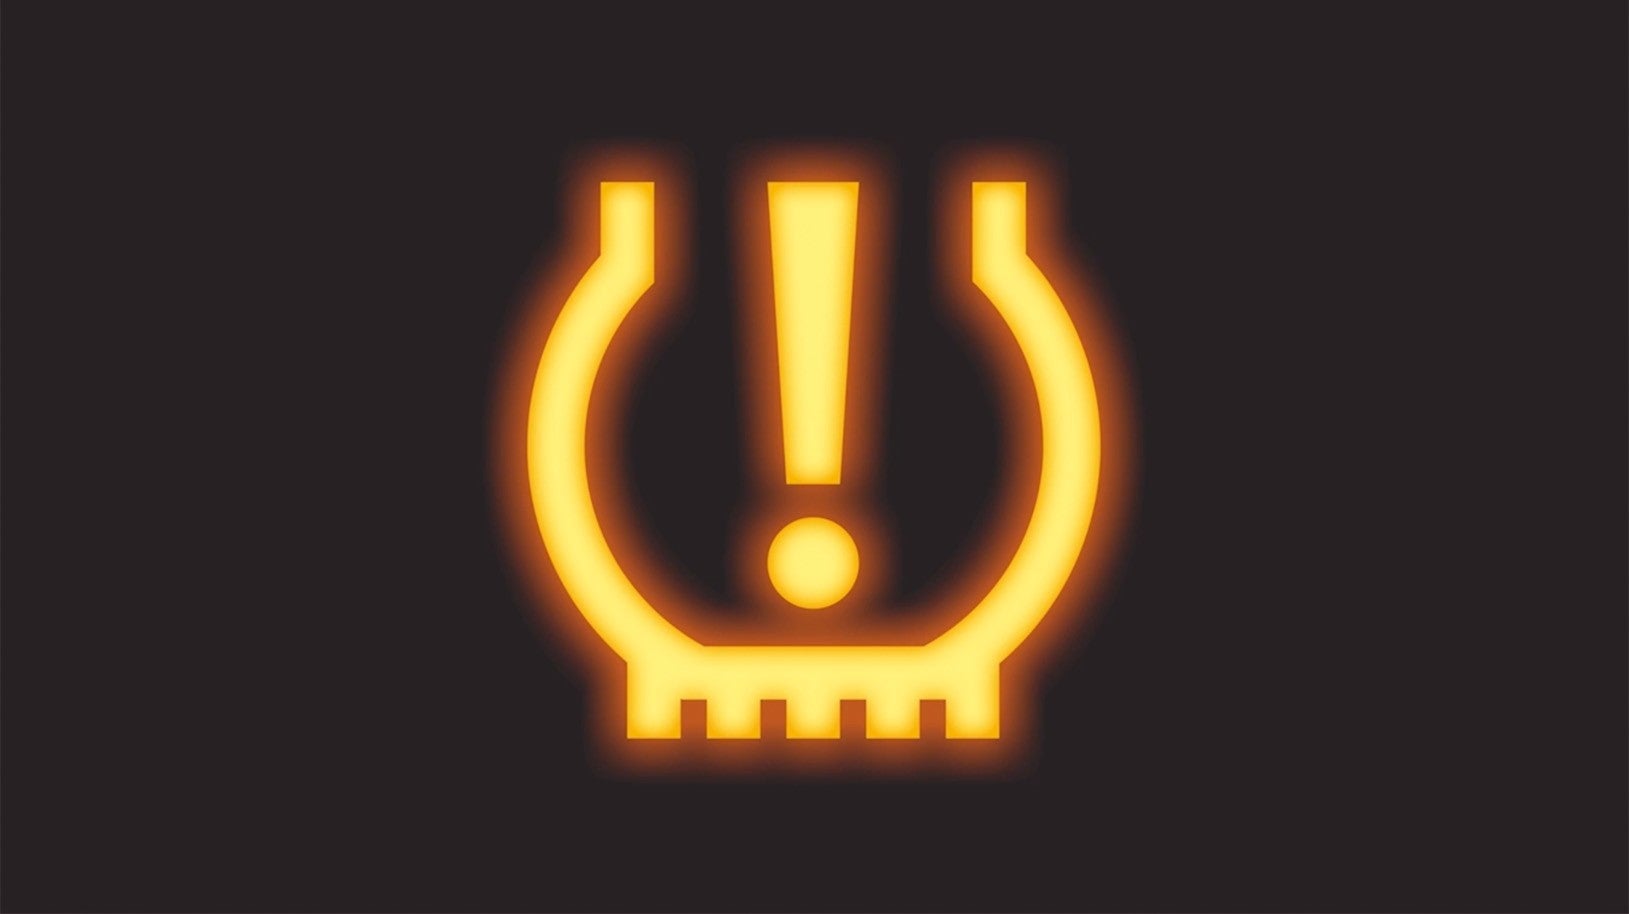  Image of the Tire Pressure Monitoring System Light | Sommer's Subaru in Mequon WI